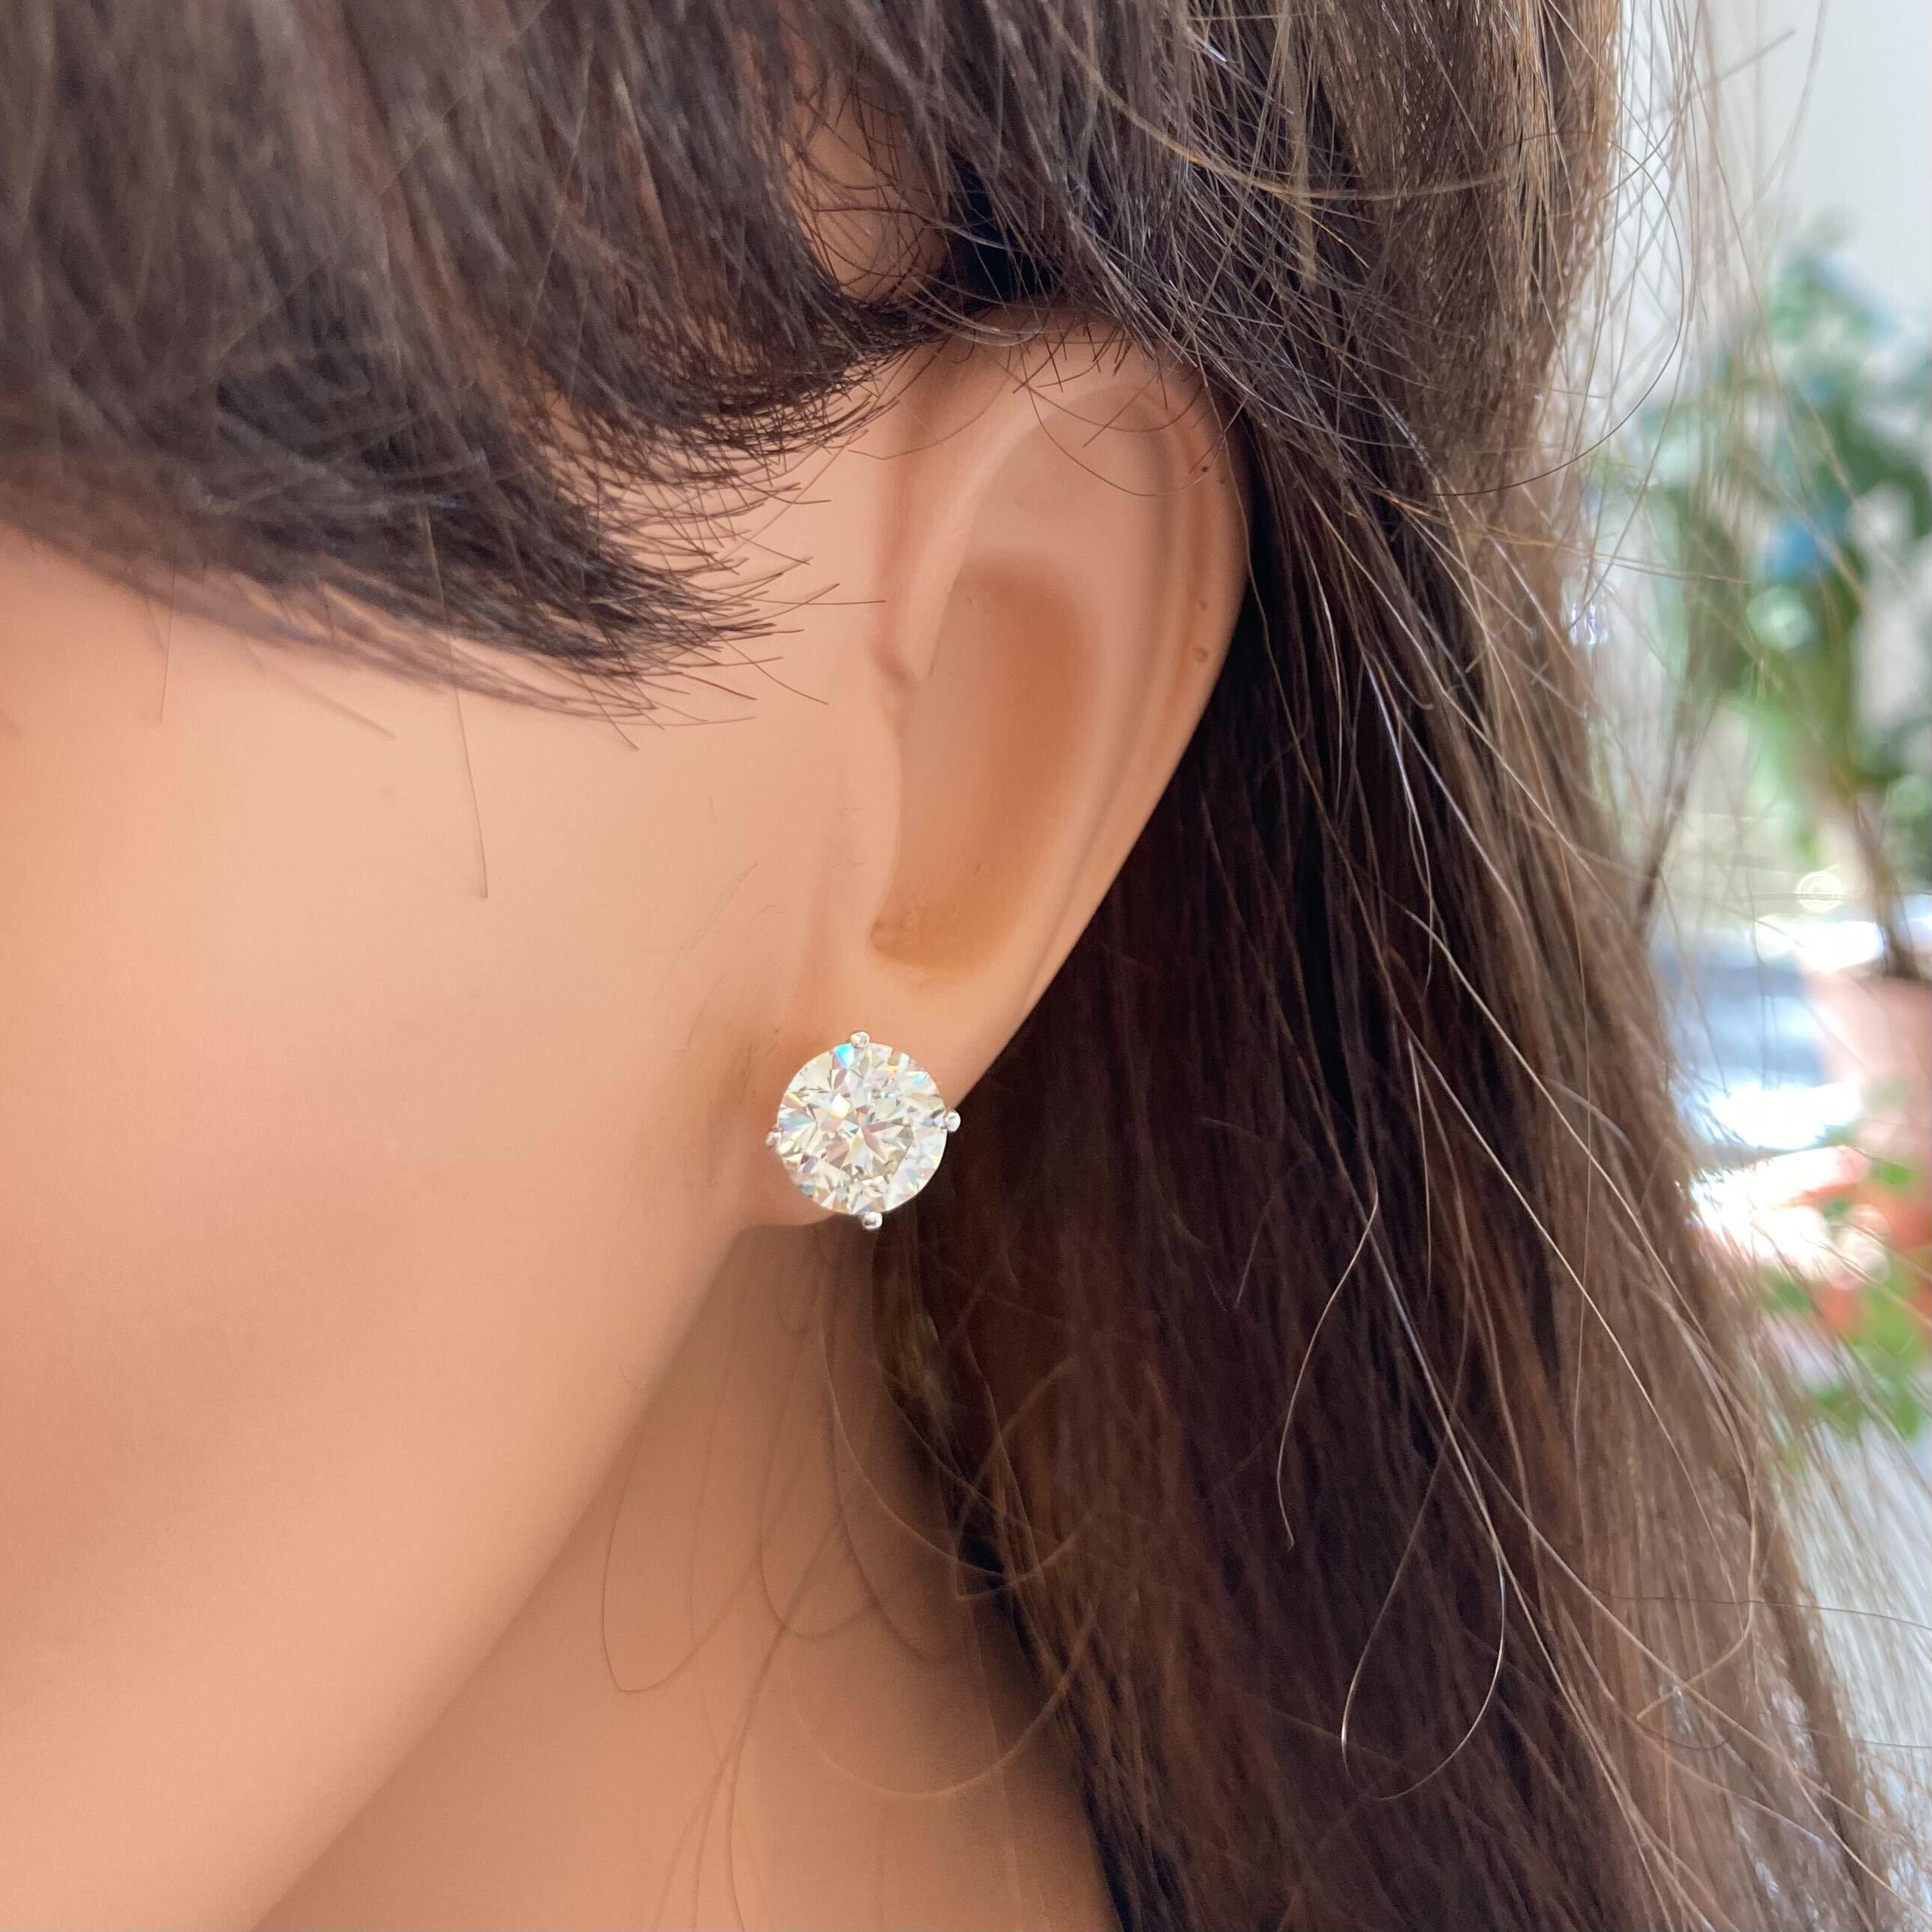 Step into the realm of opulent elegance with these extraordinary 4.59 Total Carat Weight EGL Certified Round Diamond Studs in 14k White Gold. Each stud showcases a captivating round diamond with a luxurious I-J color grade, emitting a mesmerizing